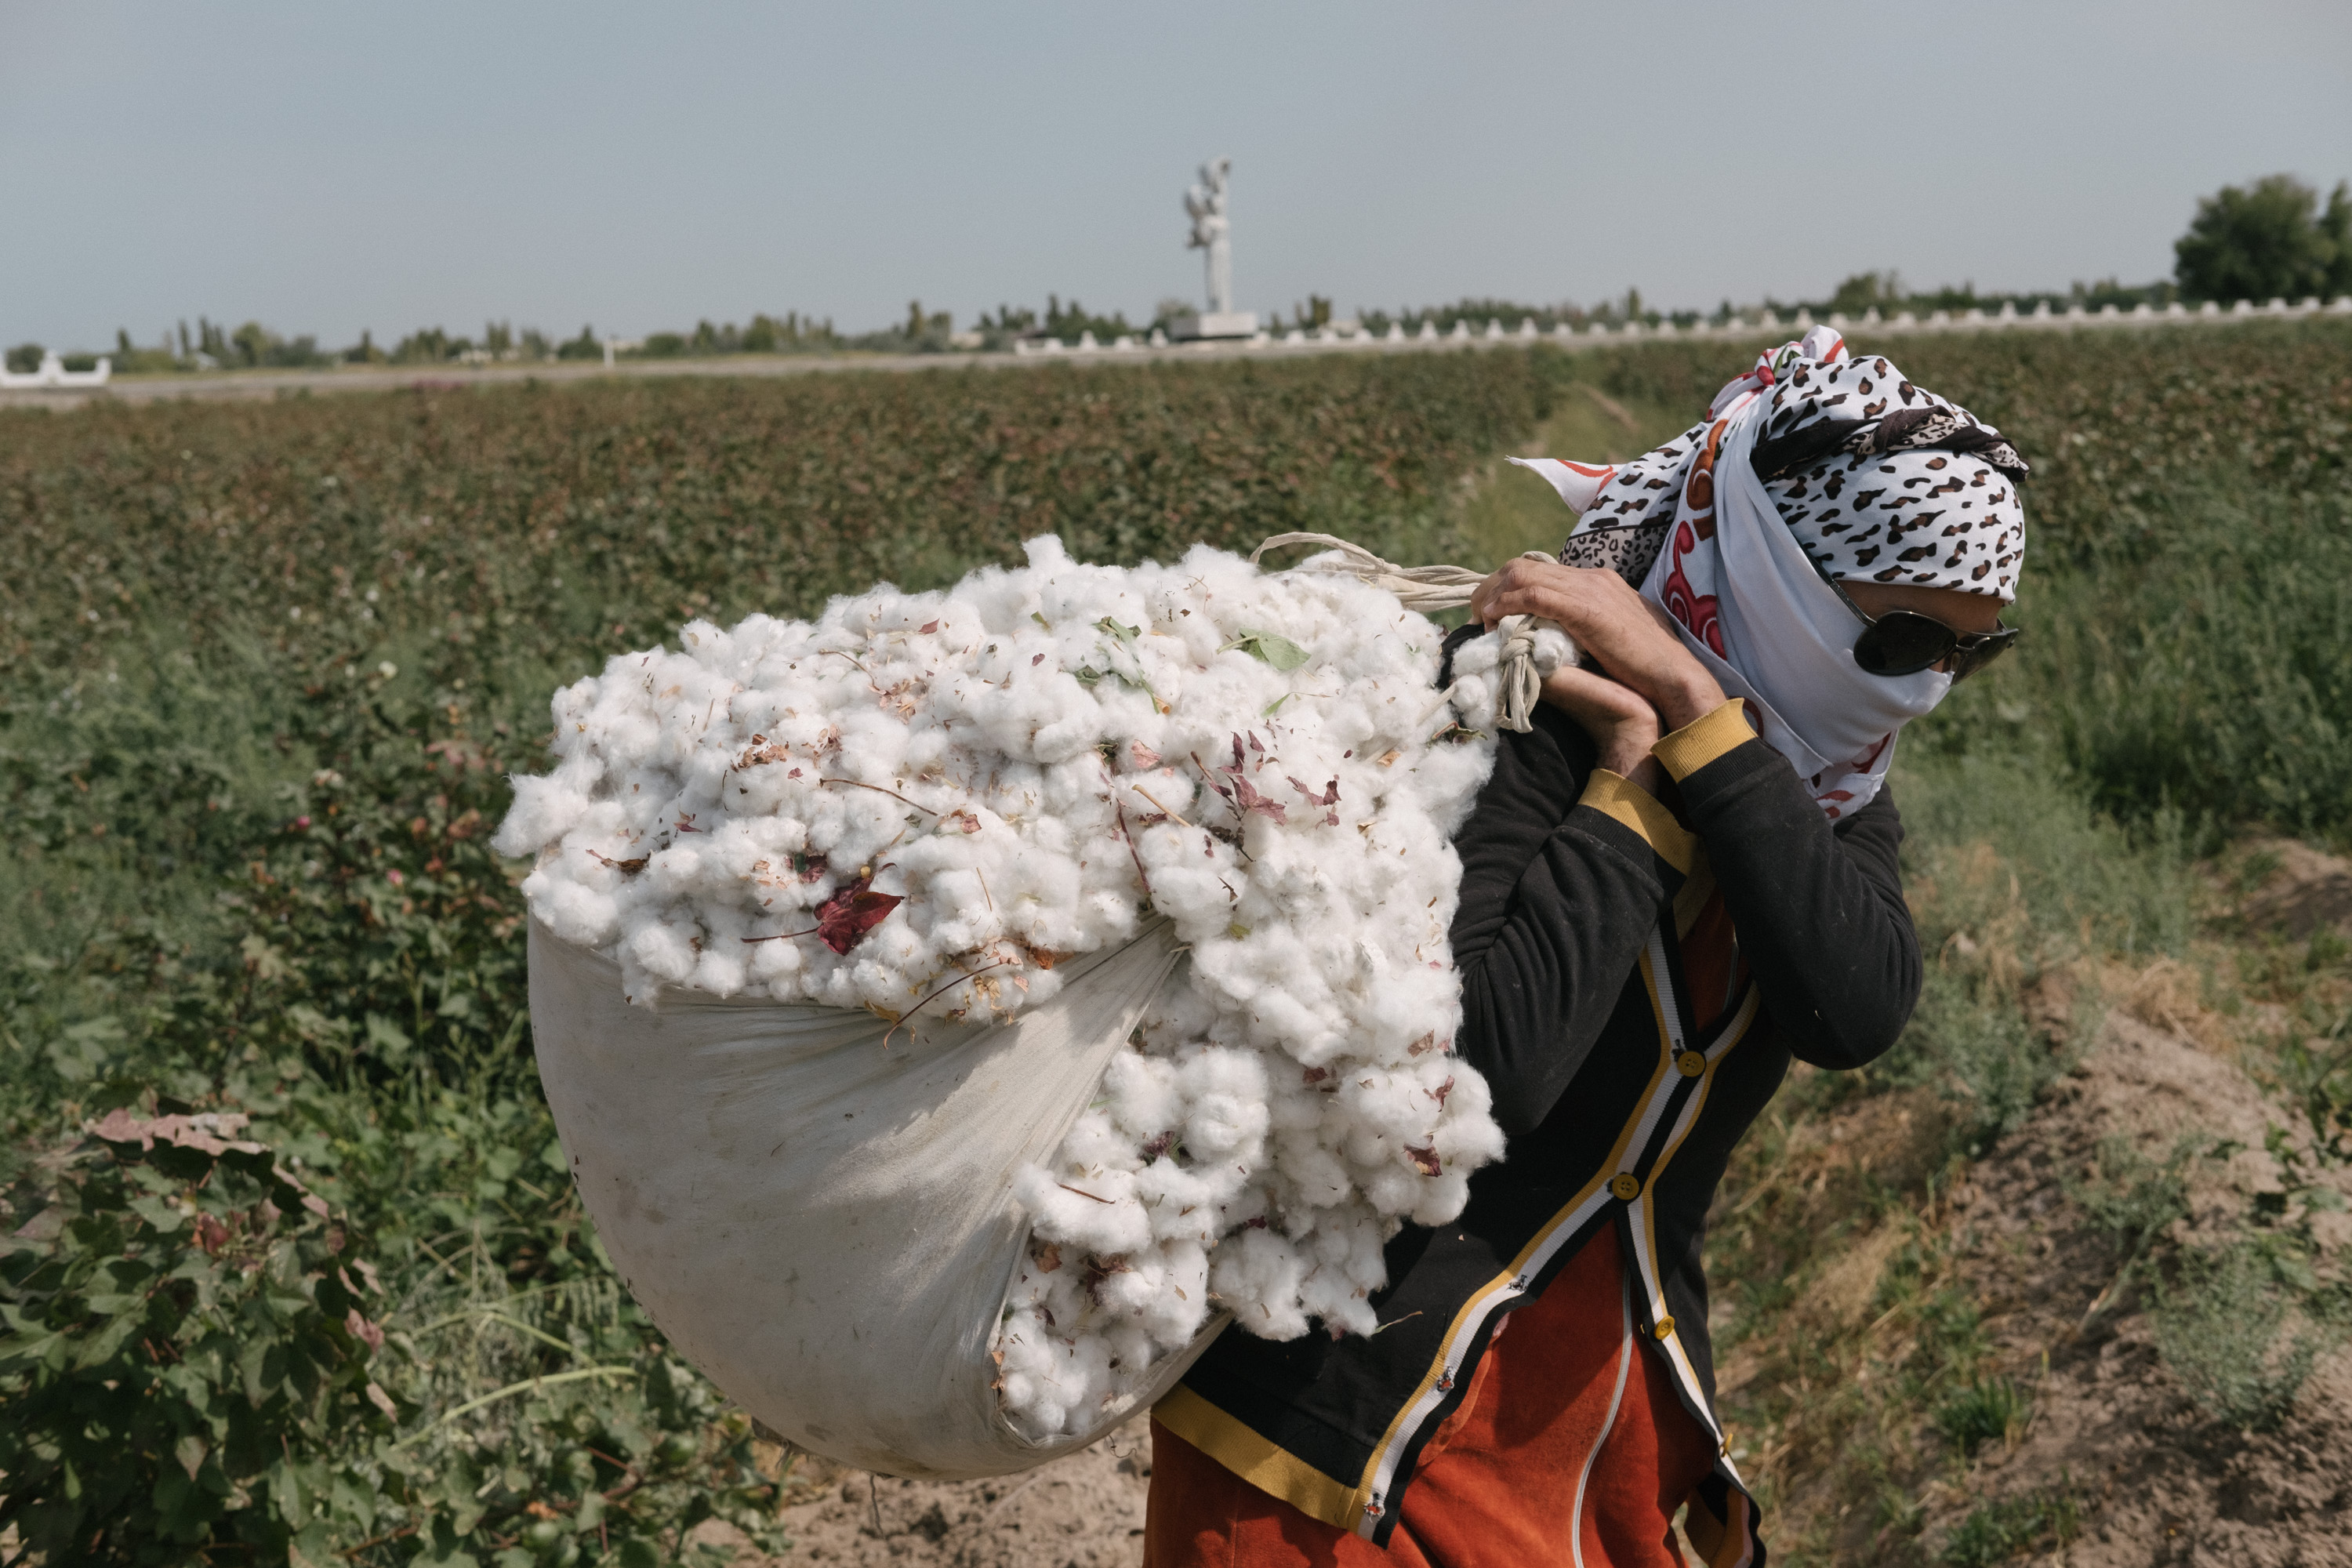 Cotton Campaign Meets with Senior Uzbek Officials in Washington —  Parties Agree to Intensify Dialogue on Ending Forced Labor